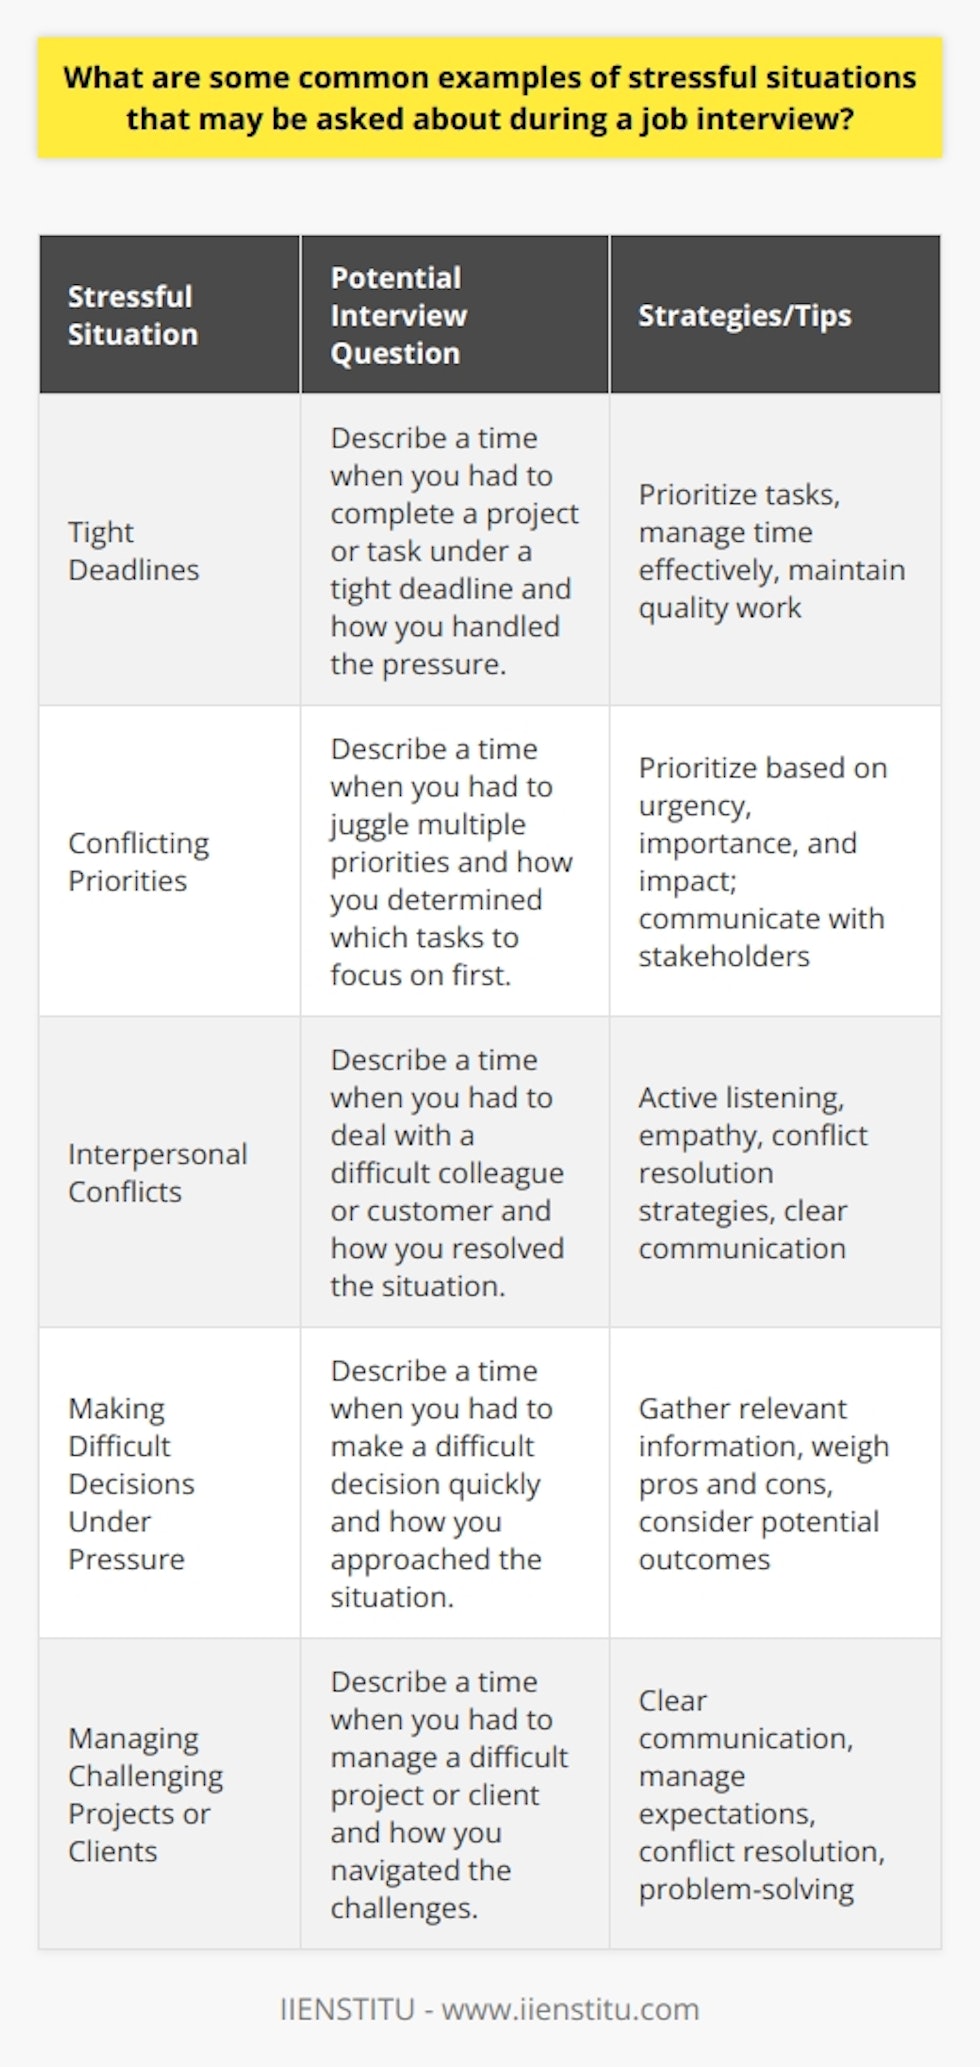 During a job interview, employers may inquire about how candidates handle stressful situations to gauge their problem-solving skills and resilience. Some common examples of stressful scenarios that interviewers may ask about include tight deadlines, conflicting priorities, and interpersonal conflicts. Interviewers may also ask candidates to describe a time when they had to make a difficult decision under pressure or how they managed a challenging project or client. Tight Deadlines One of the most common stressful situations in the workplace is dealing with tight deadlines. Employers want to know that candidates can prioritize tasks, manage their time effectively, and deliver quality work even when under time constraints. Interviewers may ask candidates to describe a time when they had to complete a project or task under a tight deadline and how they handled the pressure. Conflicting Priorities Another common stressful situation in the workplace is dealing with conflicting priorities. This can happen when multiple projects or tasks require attention simultaneously, and the candidate must decide which ones to prioritize. Interviewers may ask candidates to describe a time when they had to juggle multiple priorities and how they determined which tasks to focus on first. Strategies for Dealing with Conflicting Priorities    Interpersonal Conflicts Interpersonal conflicts can also create stress in the workplace. These conflicts can arise between coworkers, managers, or clients and can be challenging to navigate. Interviewers may ask candidates to describe a time when they had to deal with a difficult colleague or customer and how they resolved the situation. Tips for Resolving Interpersonal Conflicts    Making Difficult Decisions Under Pressure Employers also want to know that candidates can make sound decisions under pressure. Interviewers may ask candidates to describe a time when they had to make a difficult decision quickly and how they approached the situation. They may also ask about the outcome of the decision and what the candidate learned from the experience. Managing Challenging Projects or Clients Finally, employers may ask candidates about their experience managing challenging projects or clients. These situations can be stressful because they often involve multiple stakeholders, competing interests, and high stakes. Interviewers may ask candidates to describe a time when they had to manage a difficult project or client and how they navigated the challenges. Strategies for Managing Challenging Projects or Clients